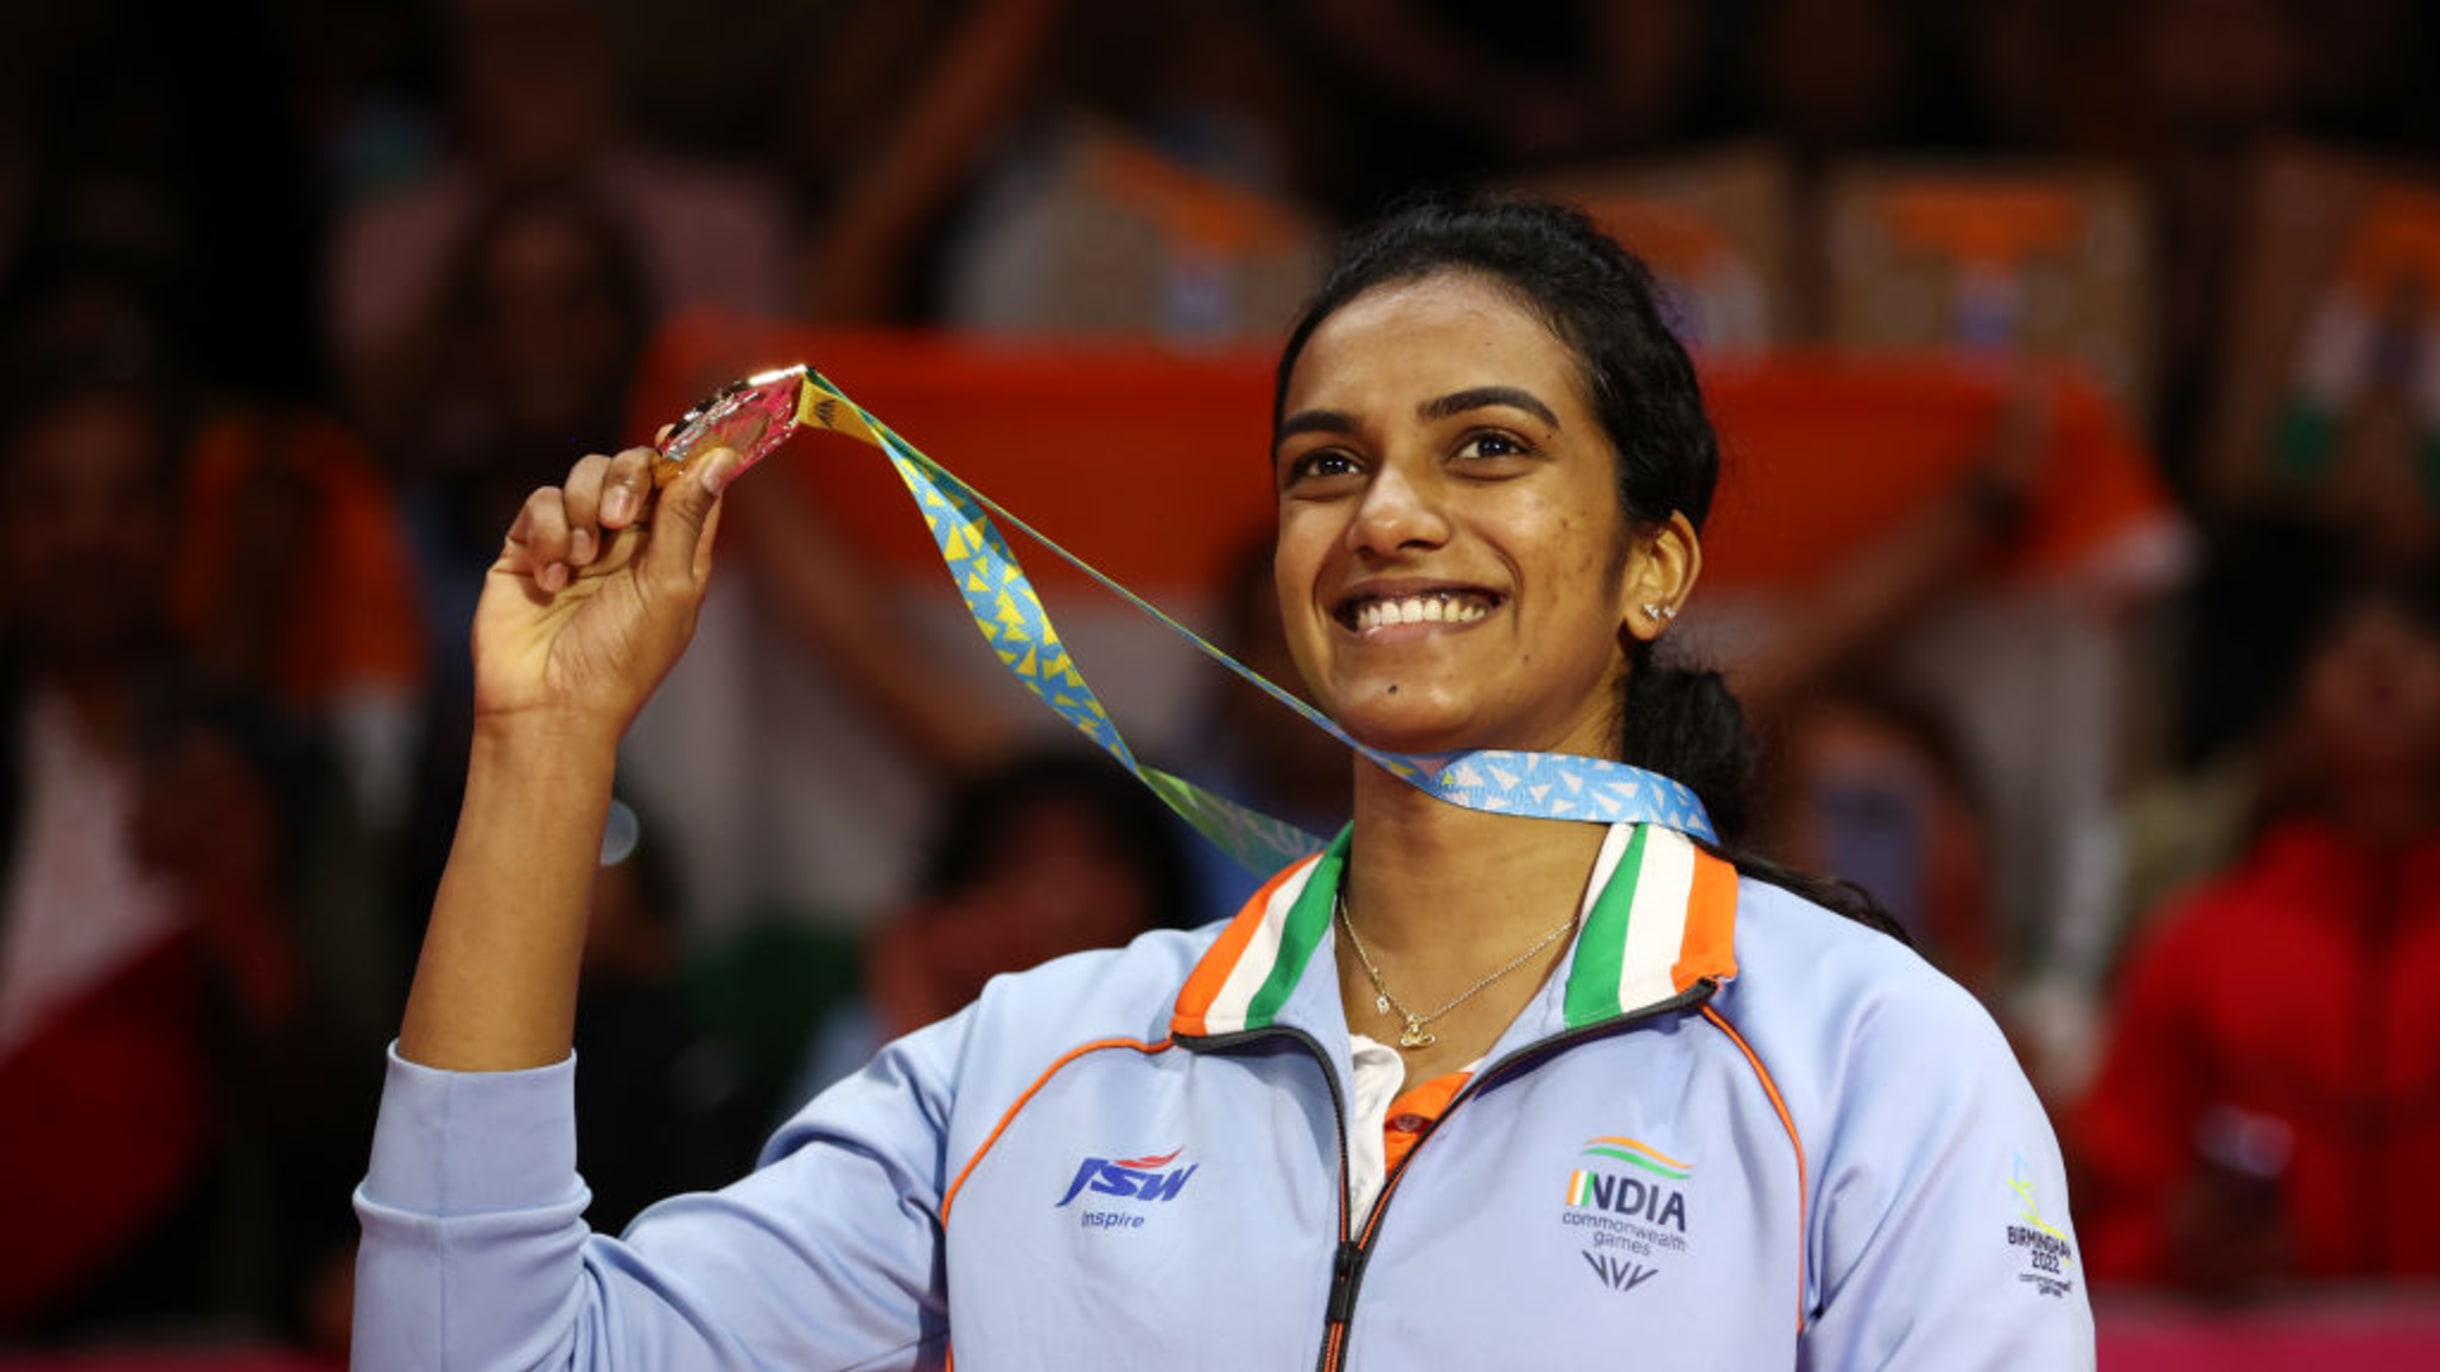 PV Sindhu wins gold medal at Commonwealth Games 2022